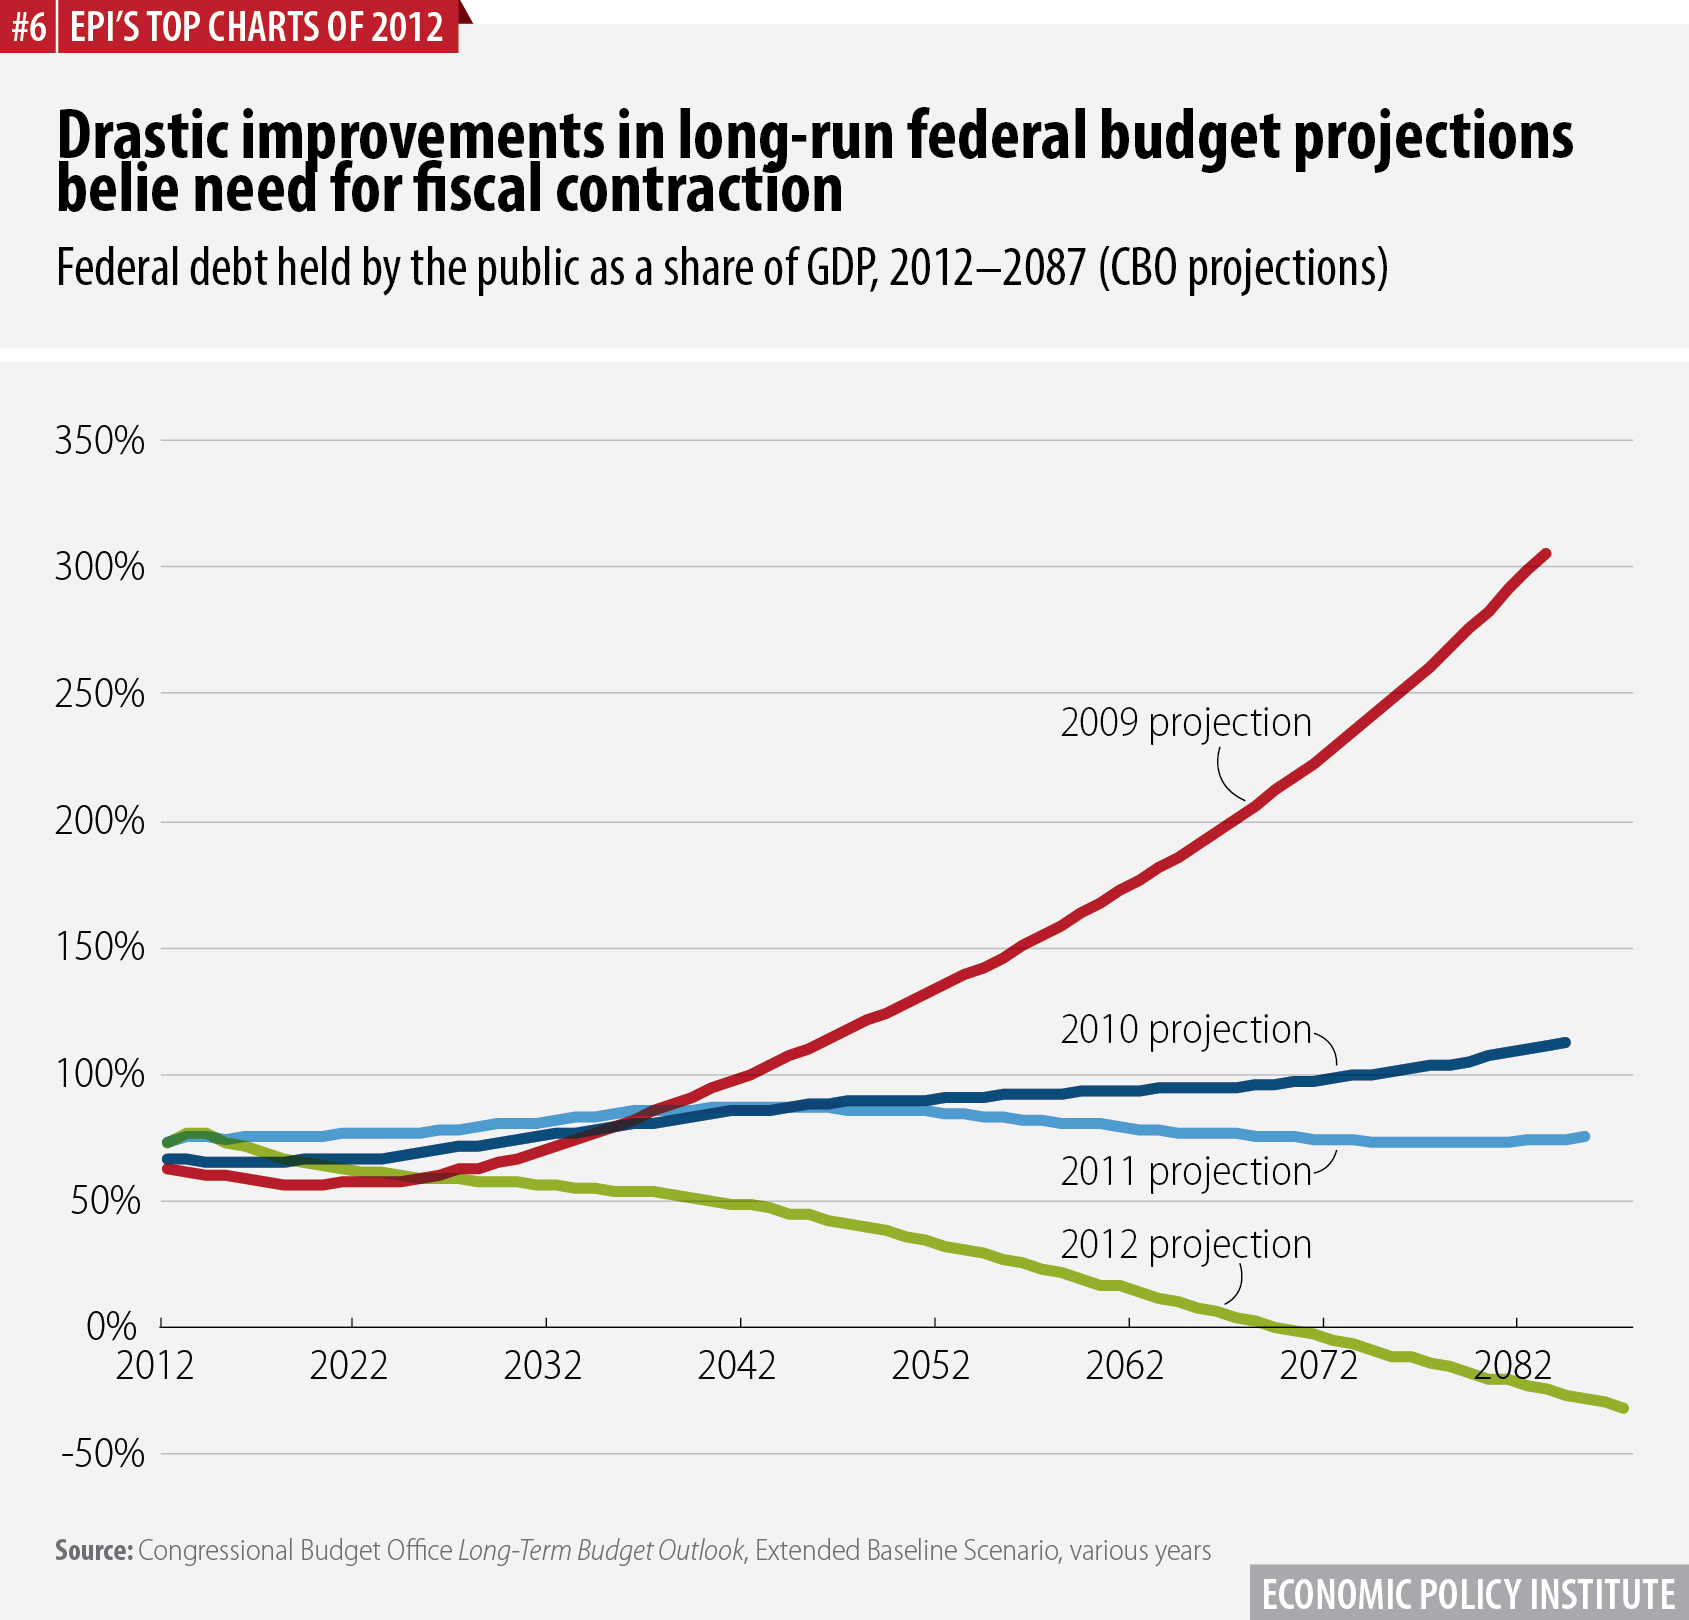 Drastic improvements in long-run federal budget projections belie need for fiscal contraction | Federal debt held by the public as a share of GDP, 2012–2084 and beyond (CBO projections)